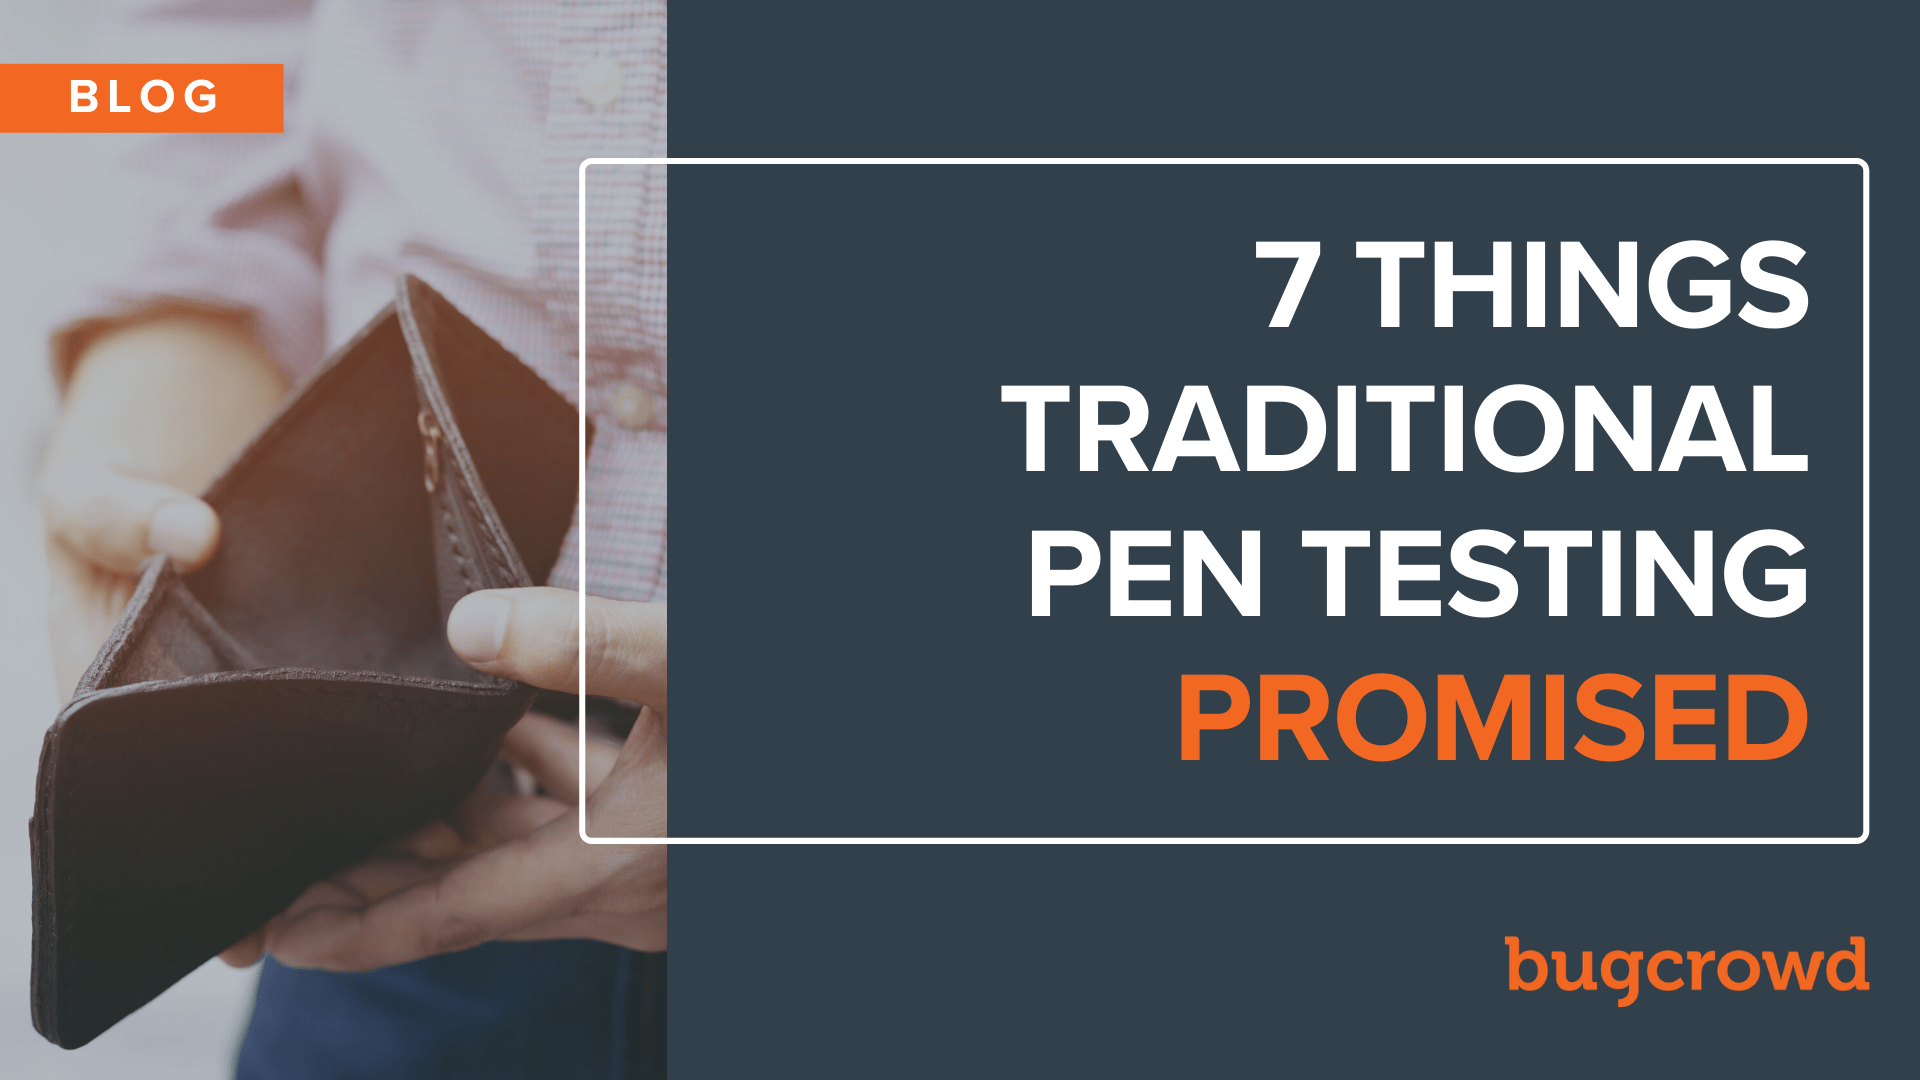 7 Things Traditional Pen Testing Promised